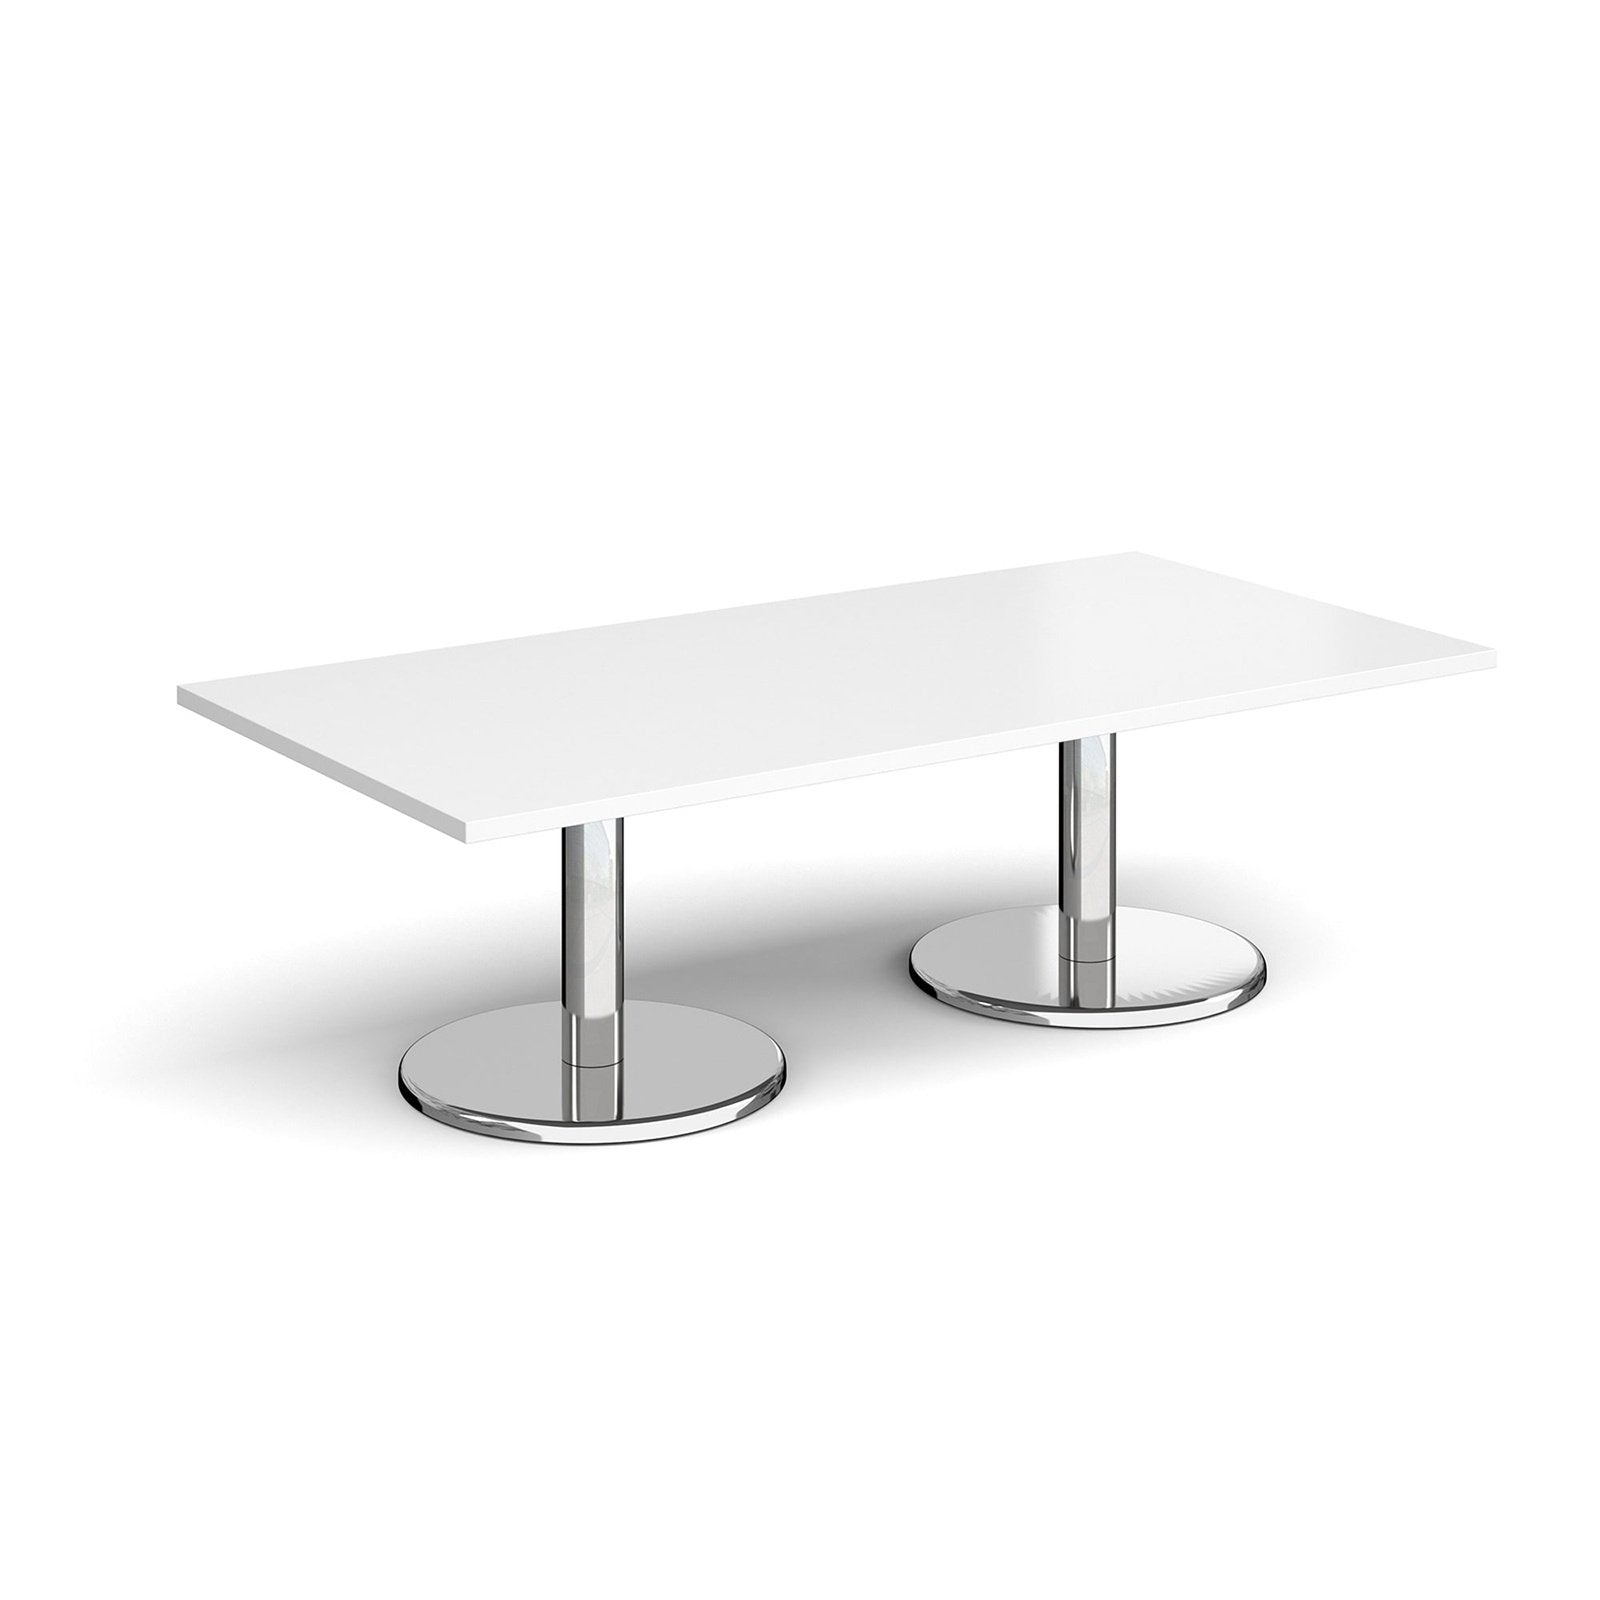 Pisa rectangular coffee table with round chrome bases - Office Products Online